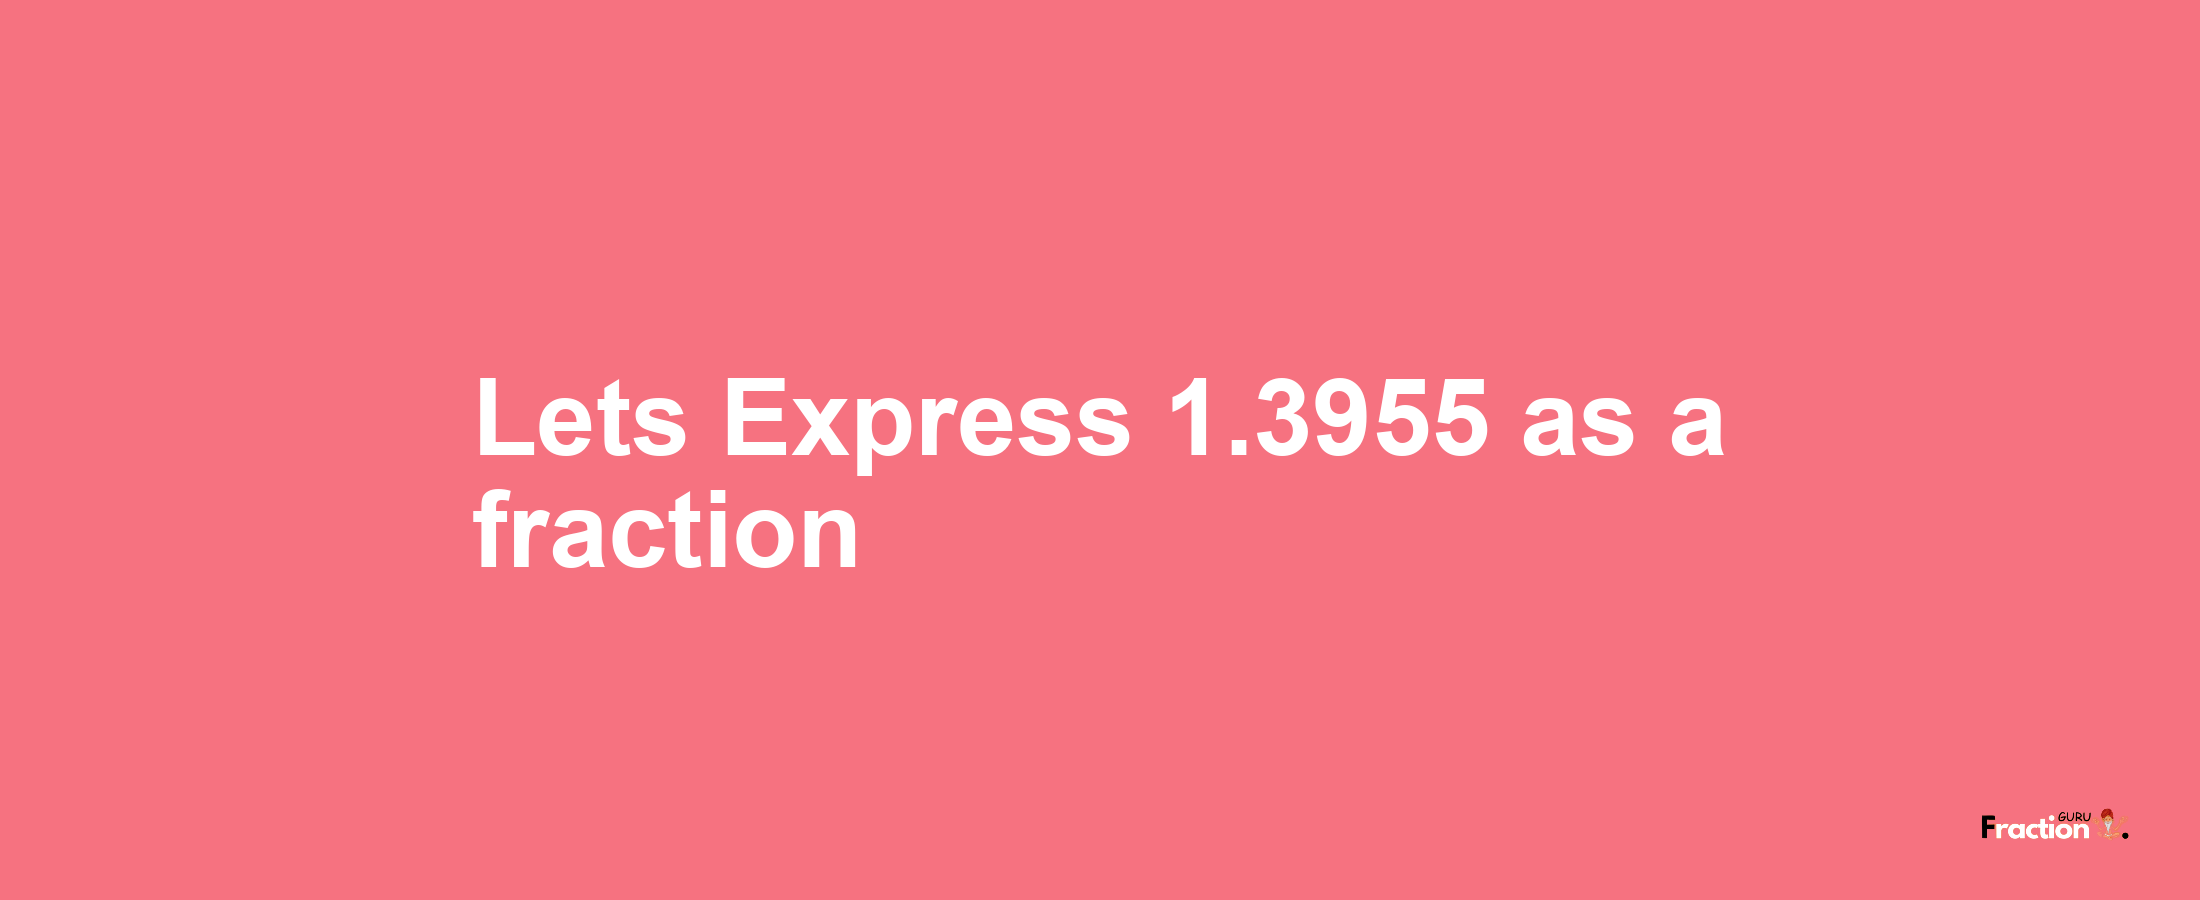 Lets Express 1.3955 as afraction